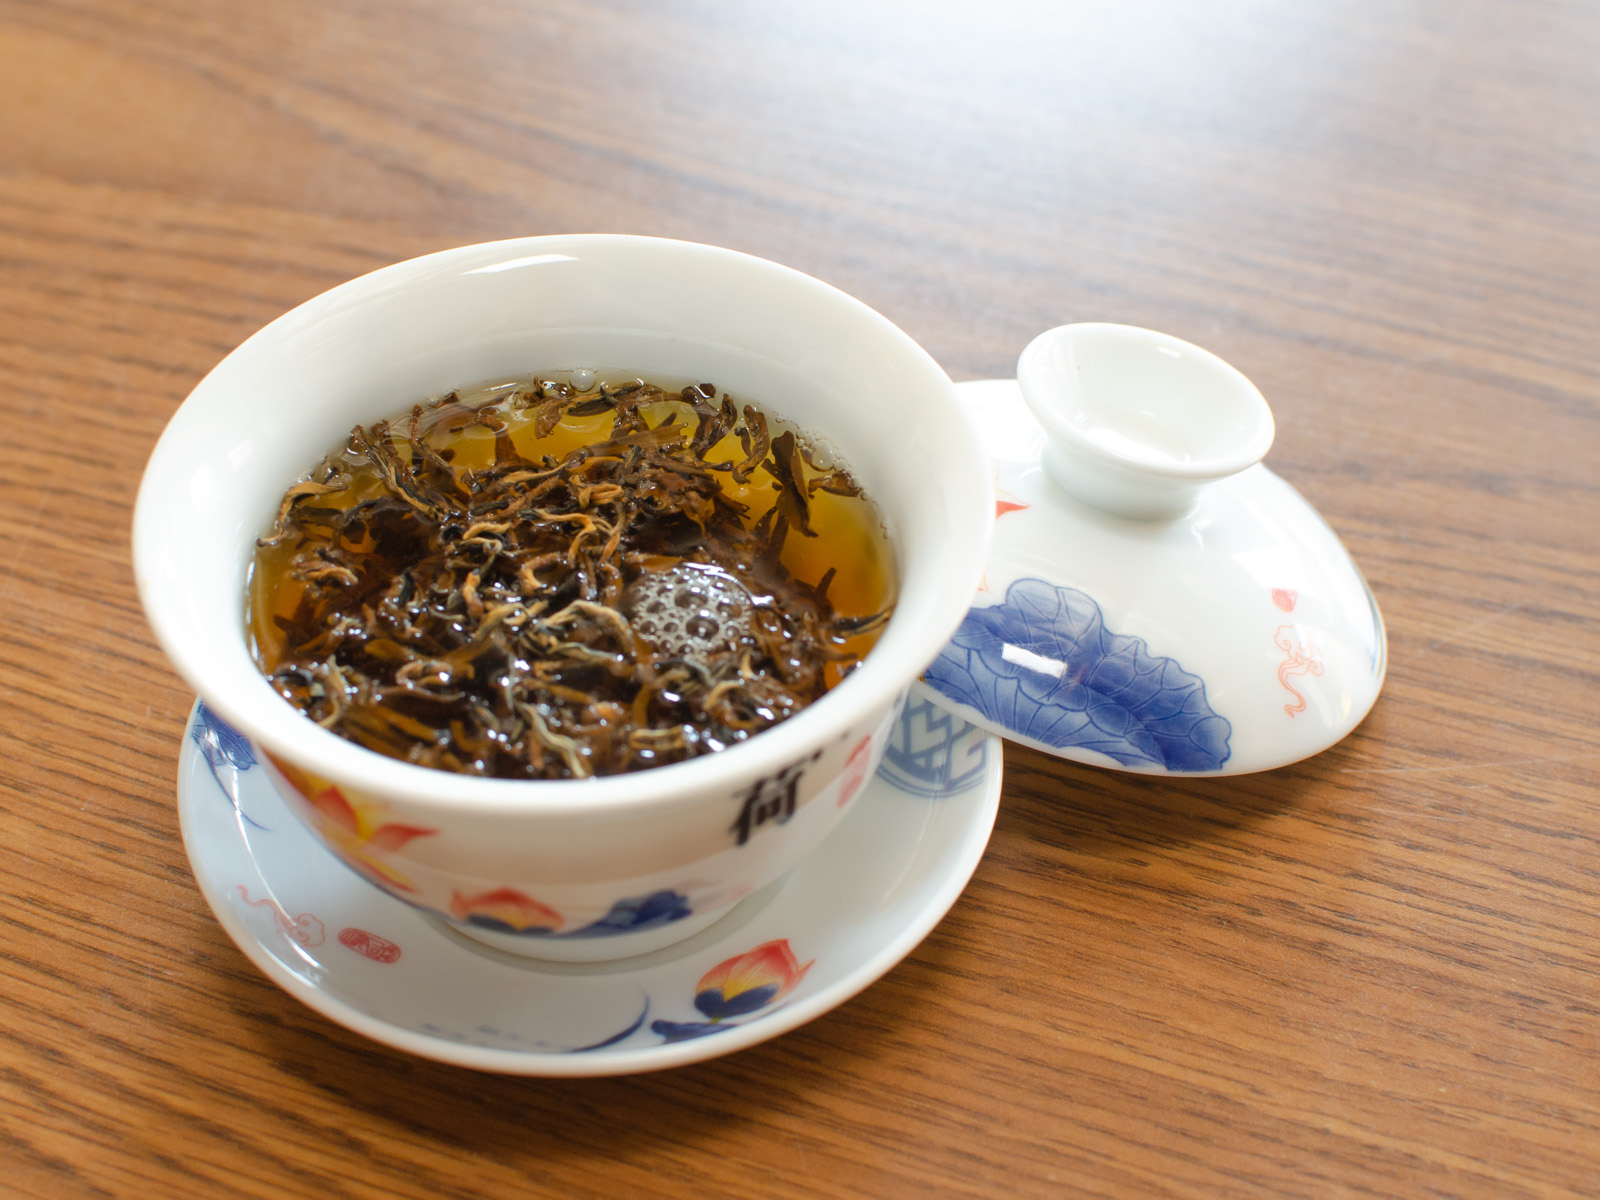 A delicate lotus-patterned gaiwan that’s just been filled with hot water - some of the Yunnan black tea leaves floating on top are still dry.